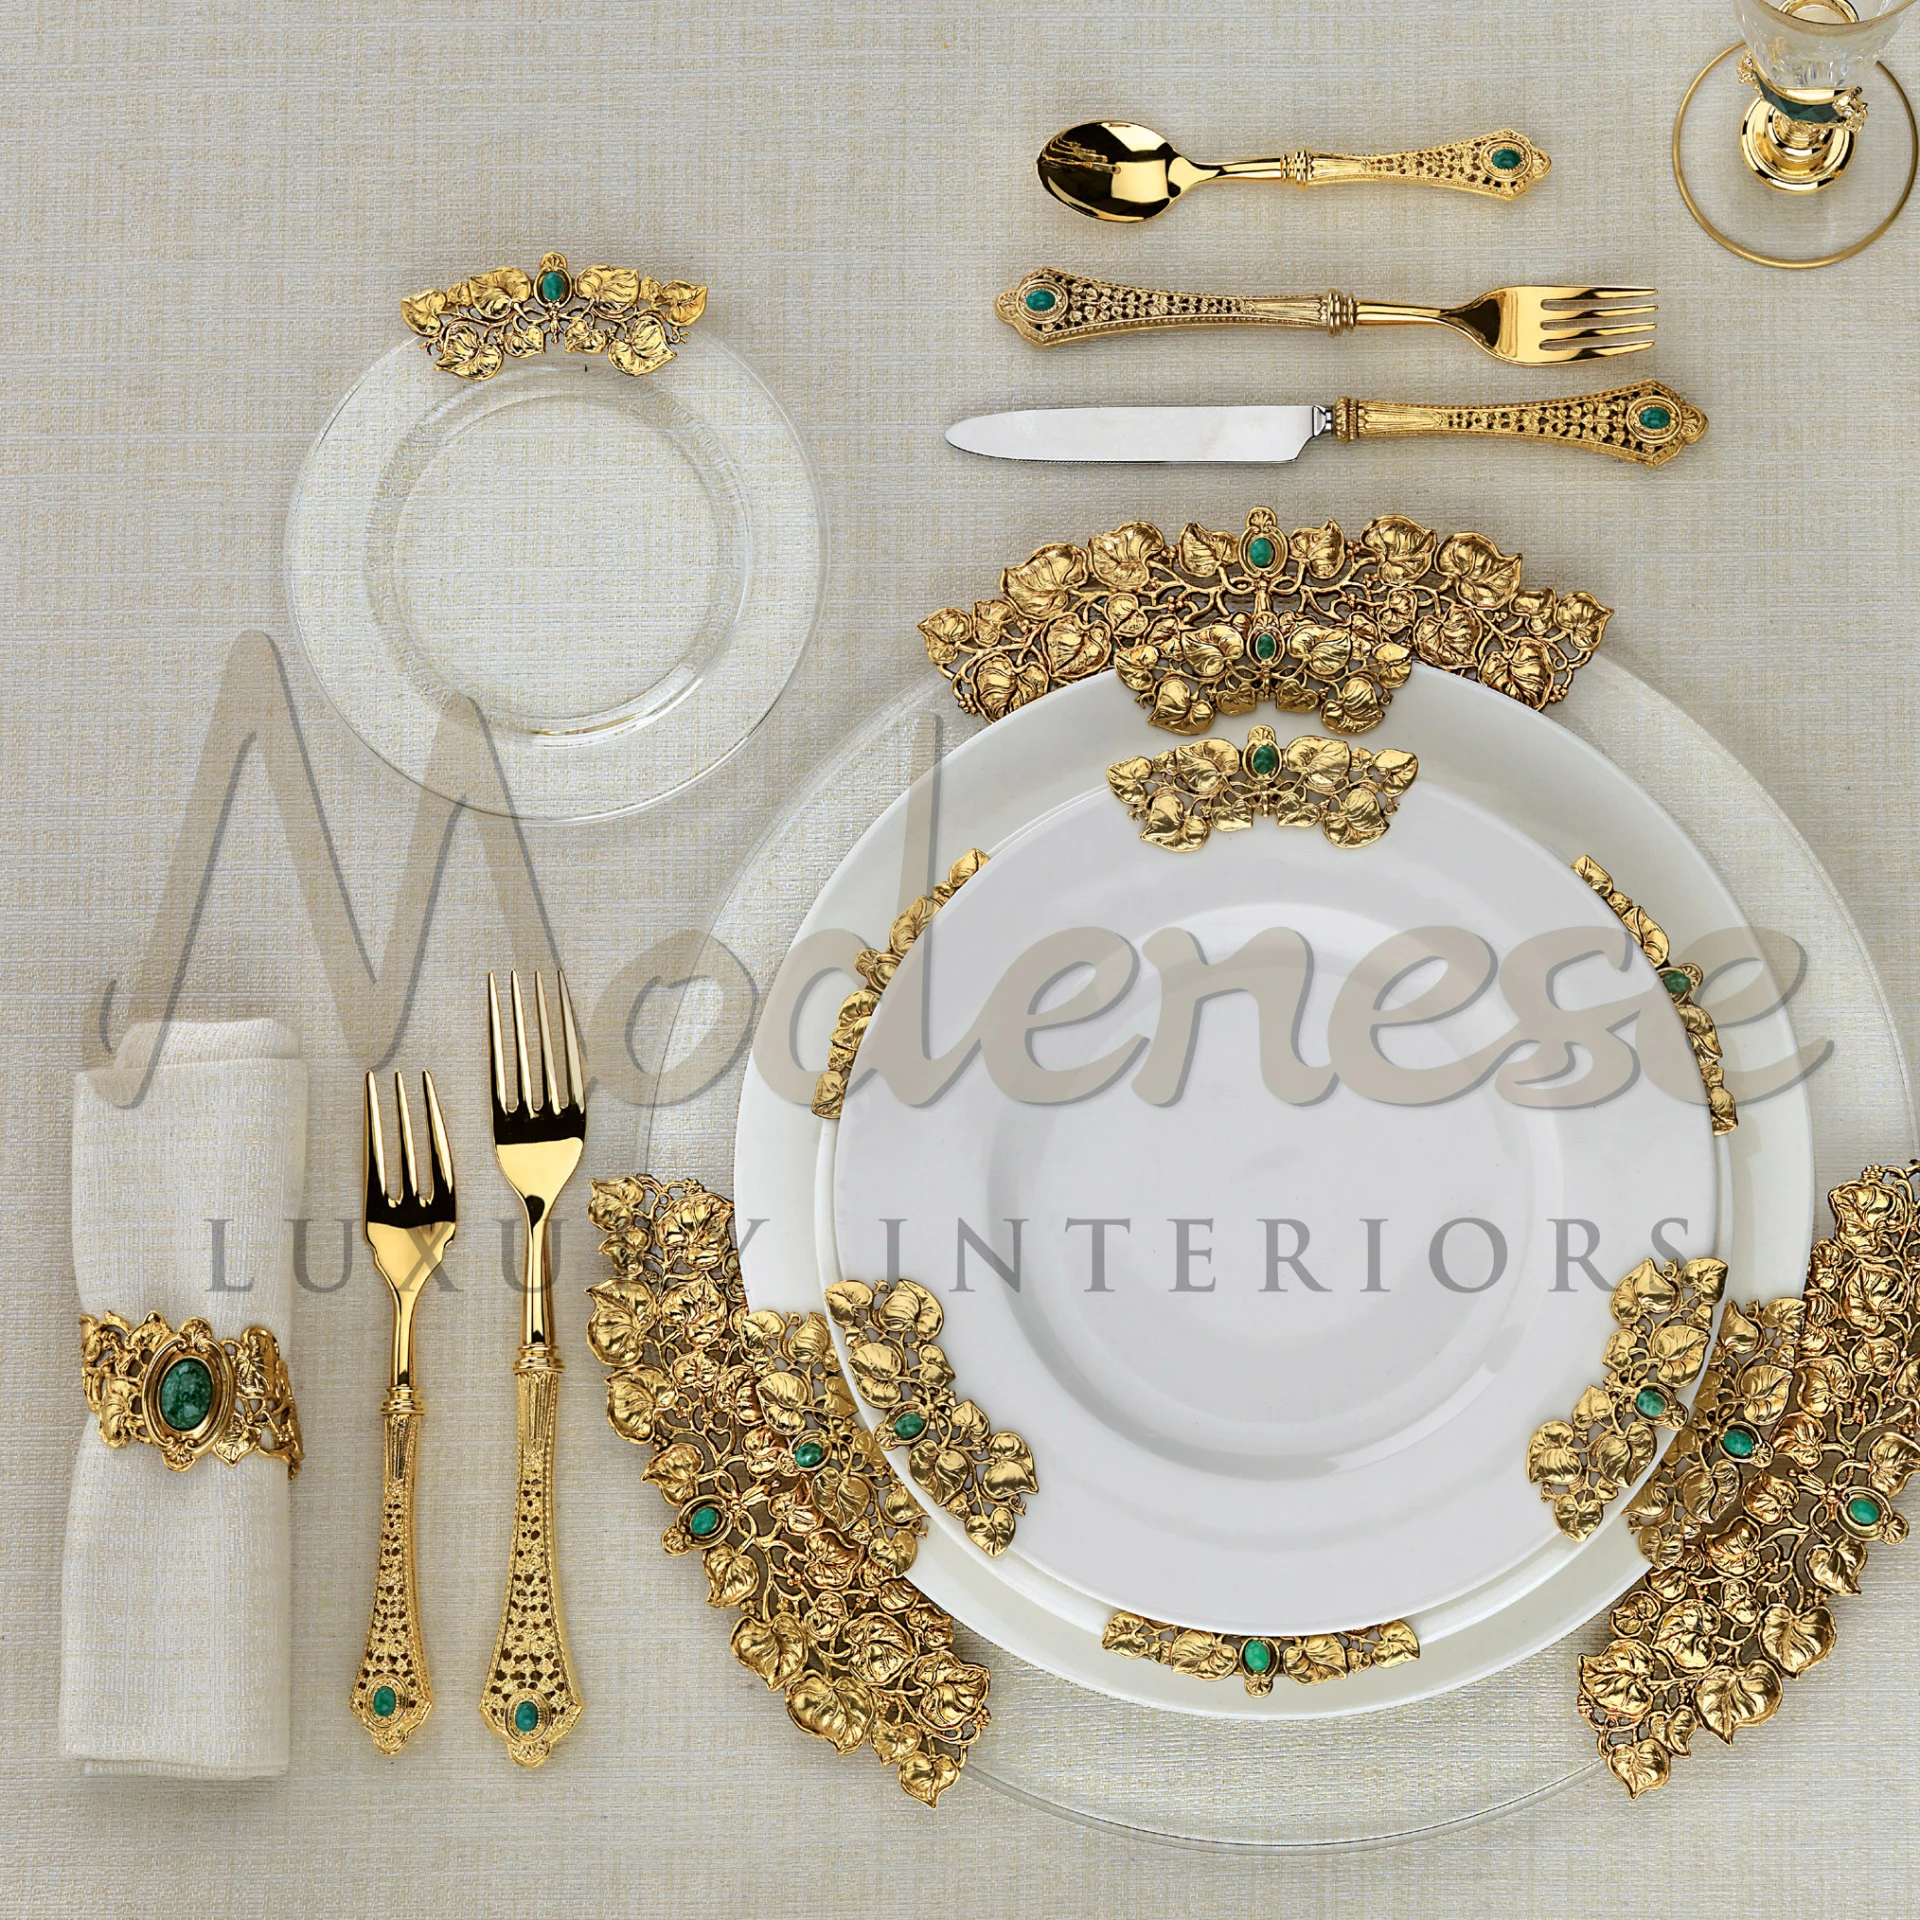 Luxury dining setup with gold-embossed silverware and emerald accents on classic white plates.